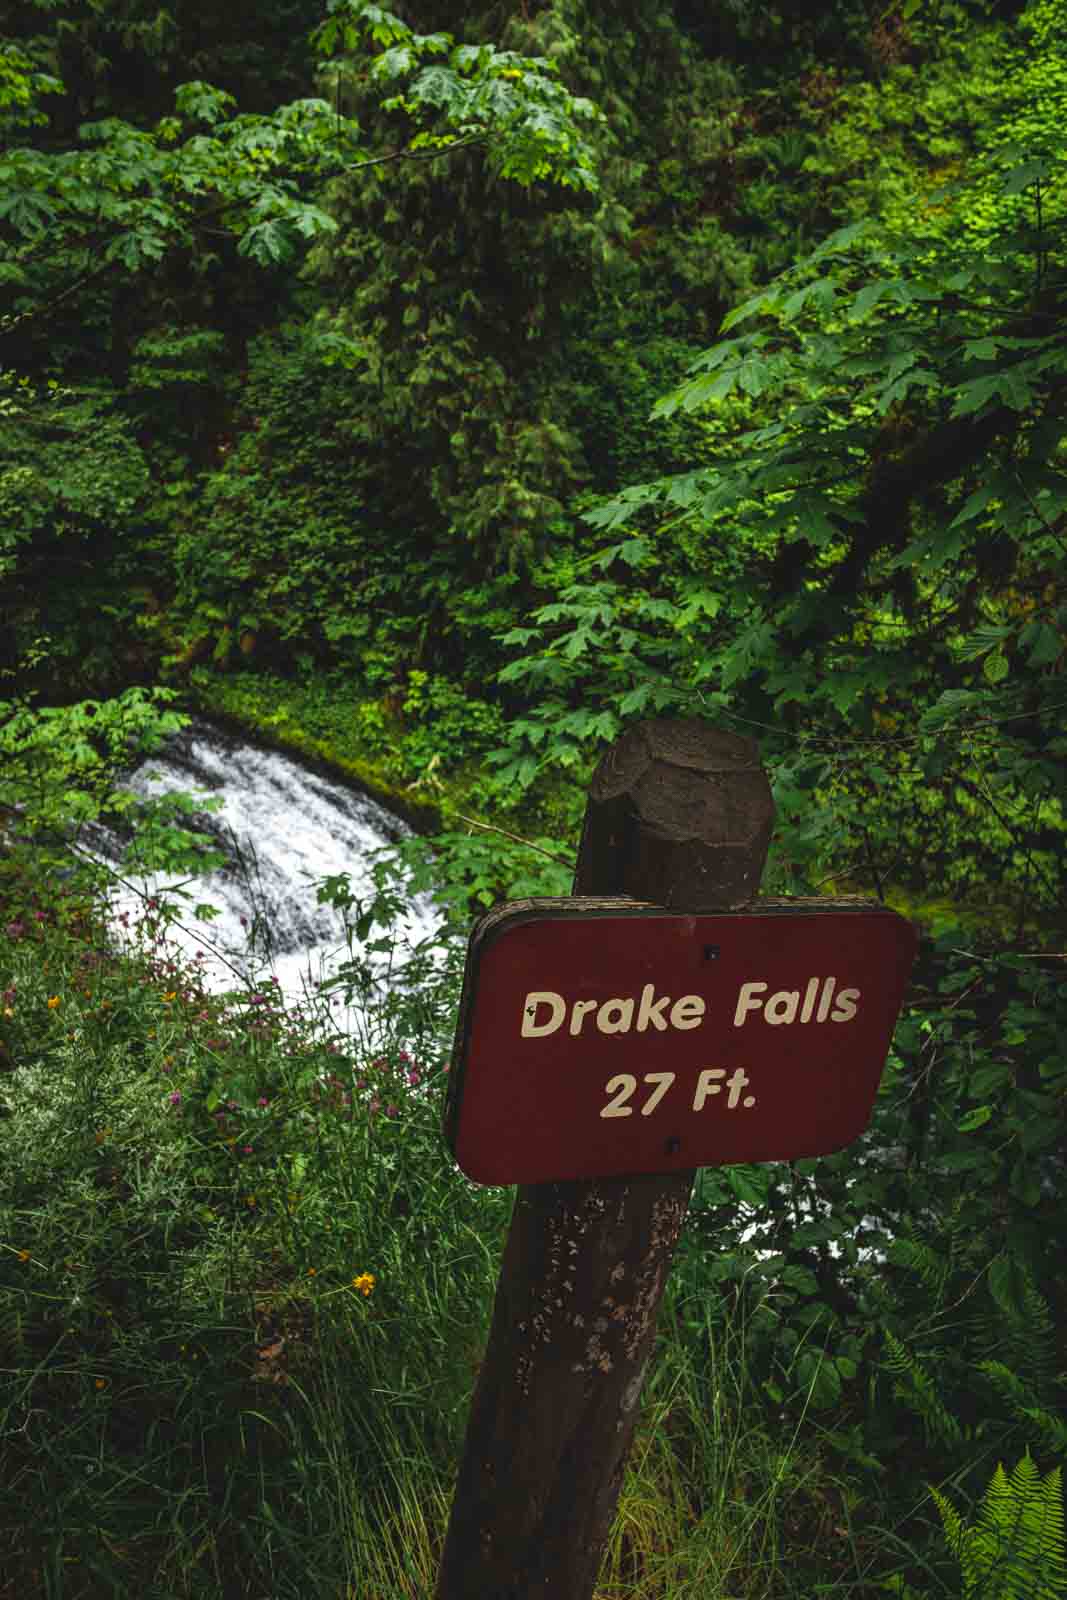 Drake Falls is another gorgeous waterfall on the Silver Falls hike.